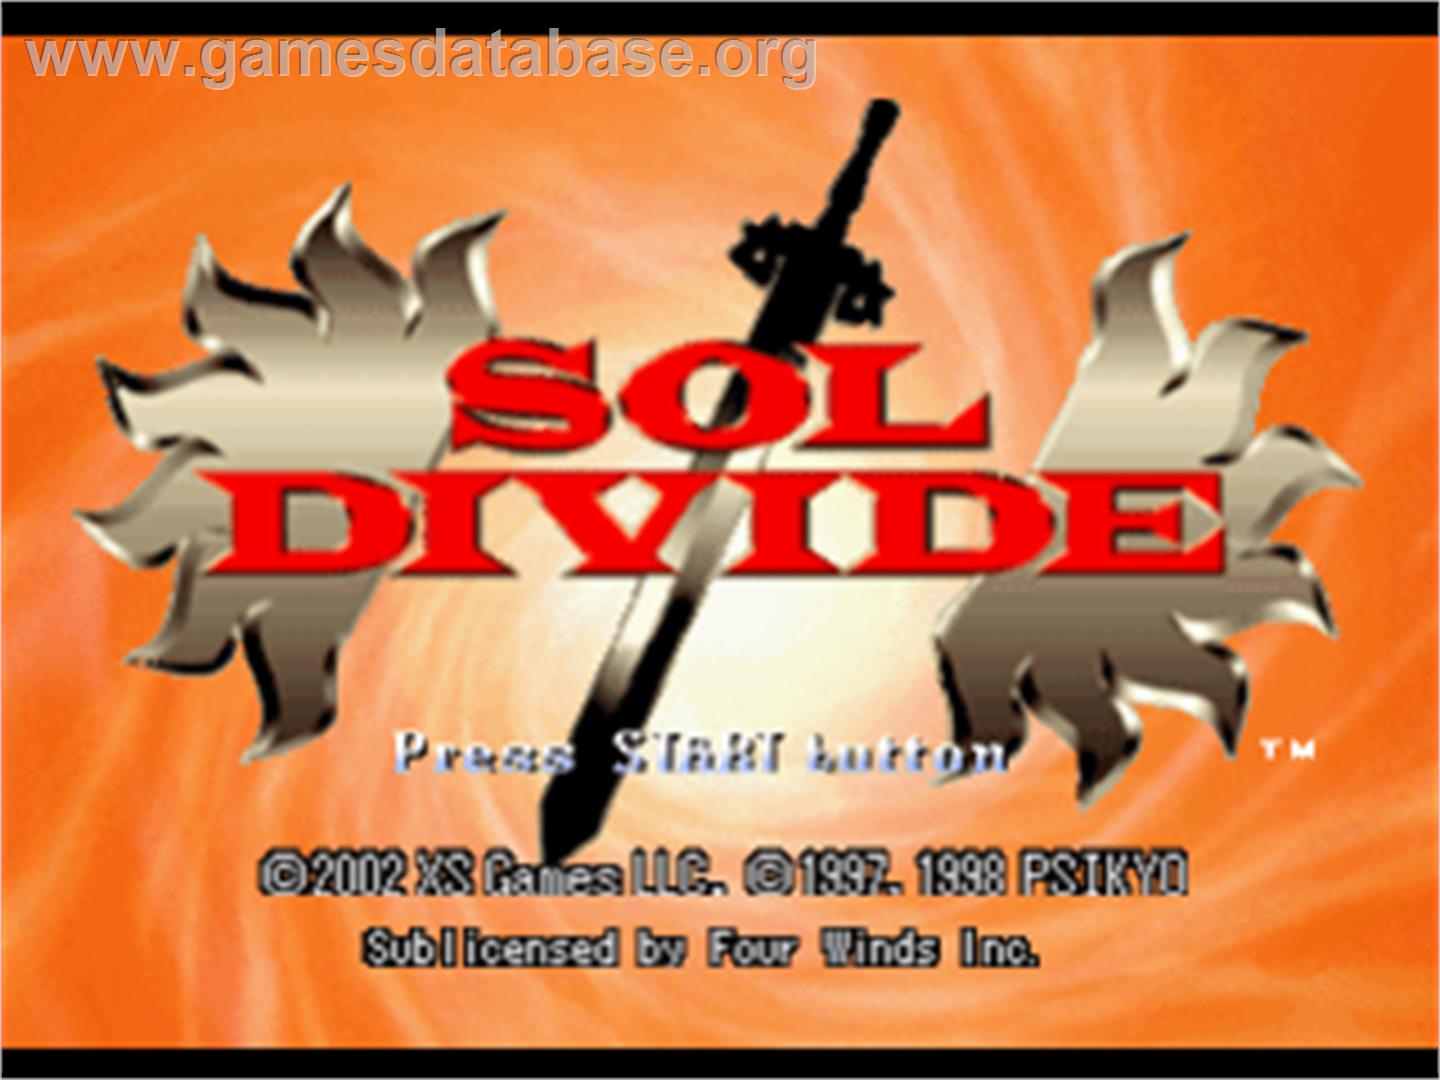 Sol Divide - Sony Playstation - Artwork - Title Screen